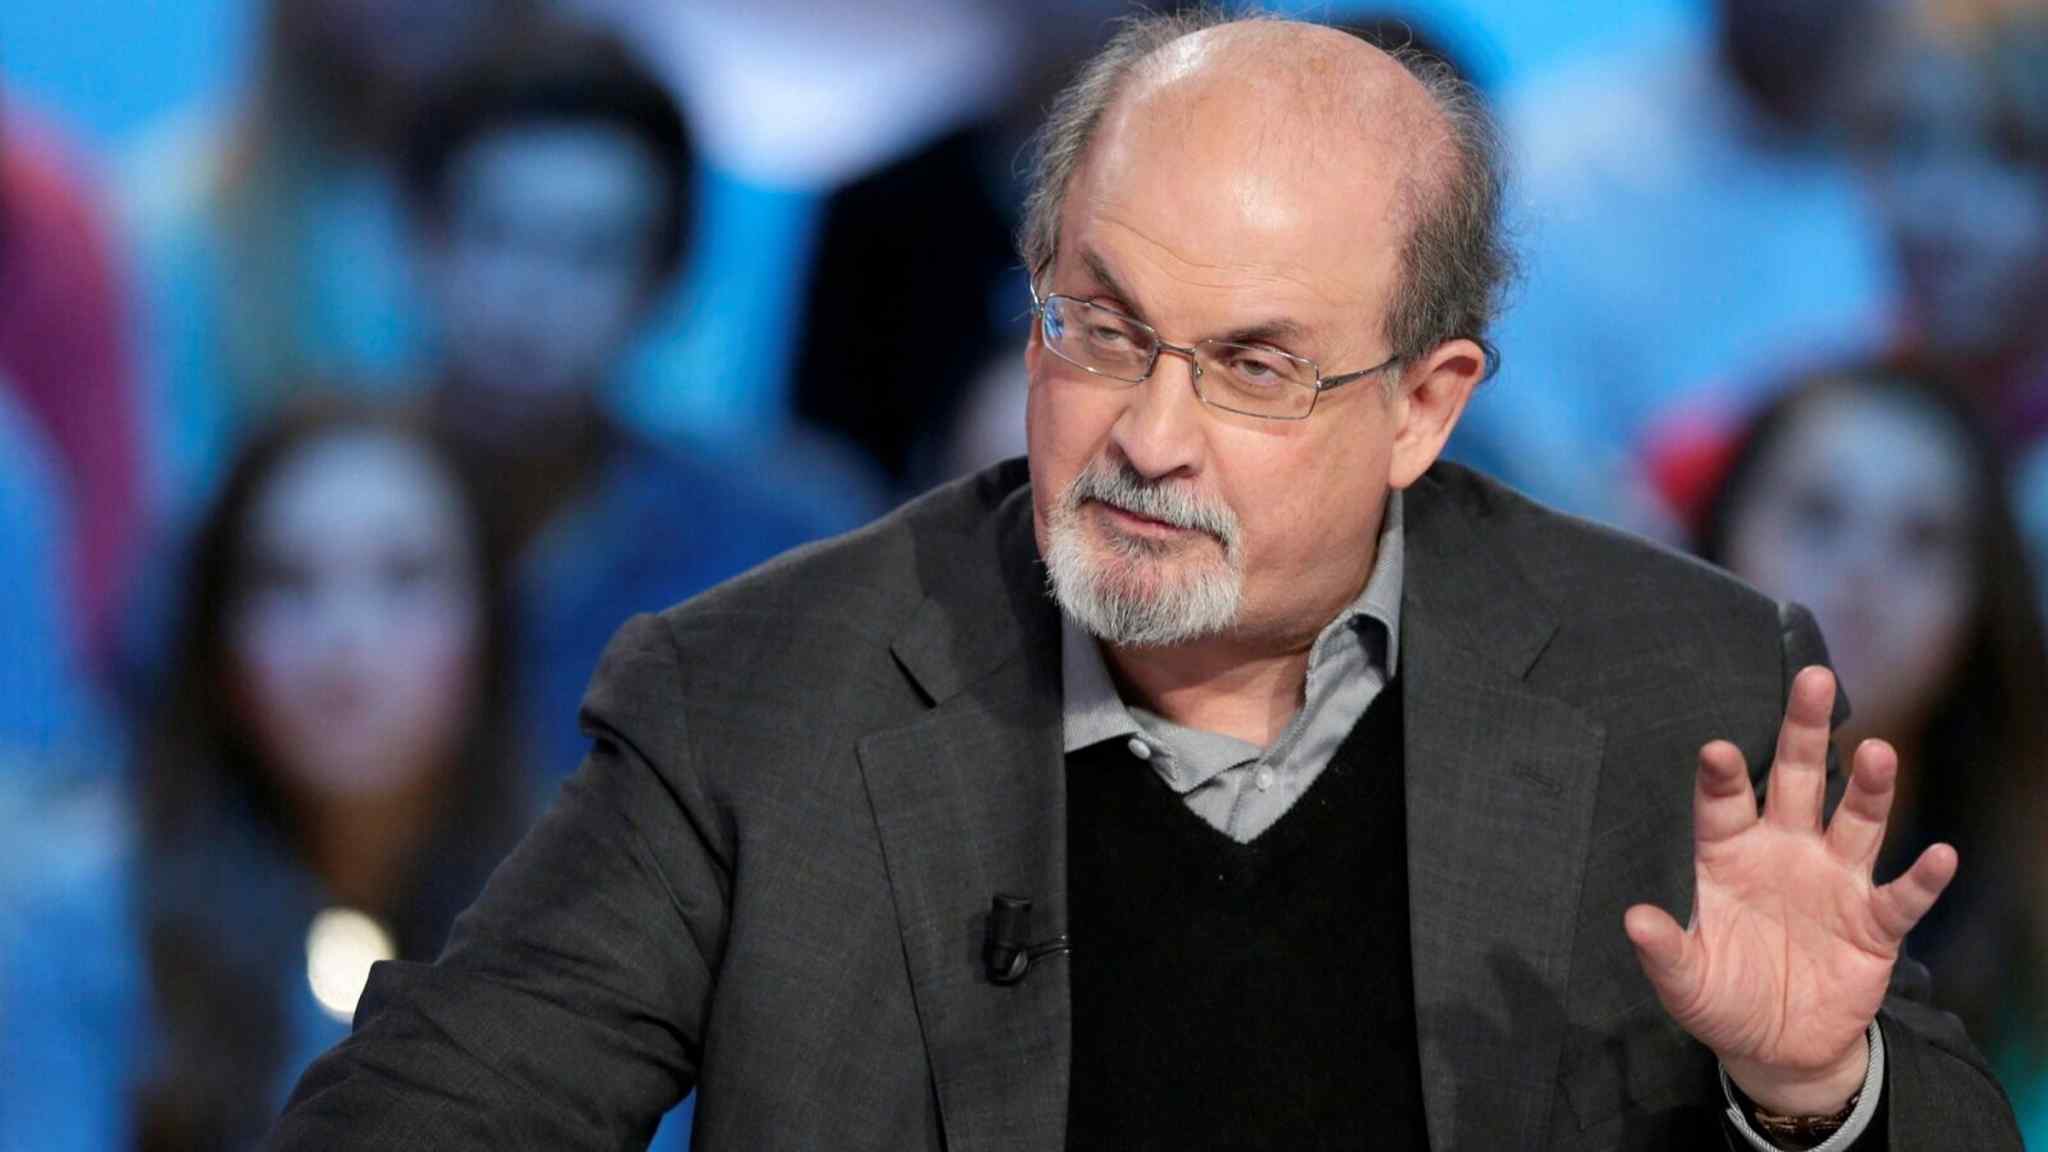 Live news updates: Satanic Verses author Salman Rushdie stabbed at event in western New York